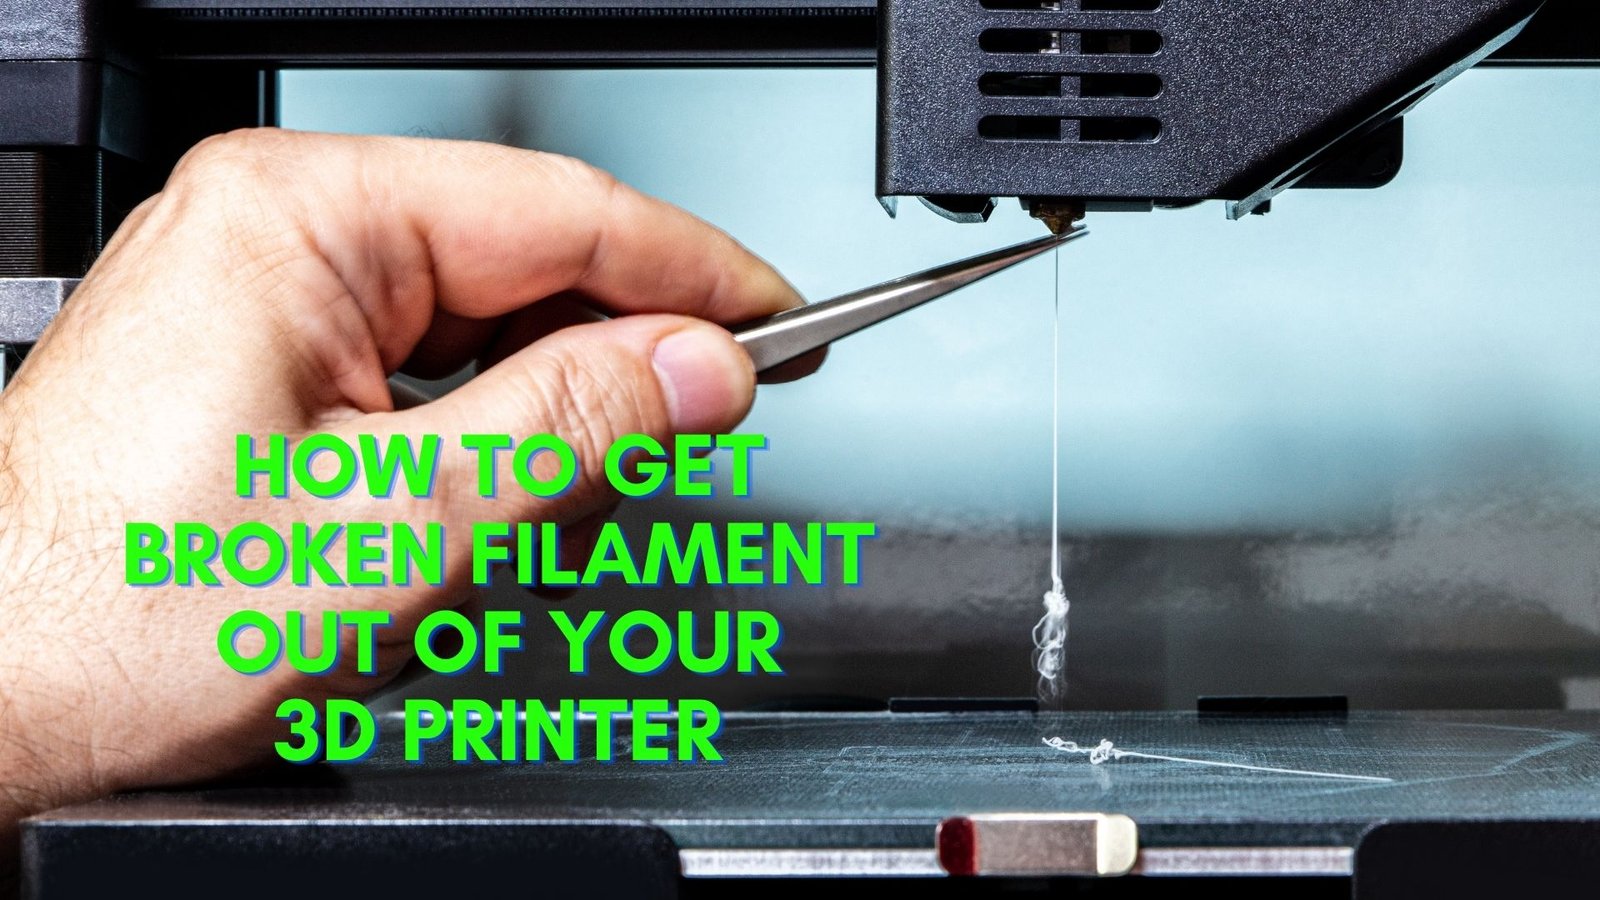 How to Get Broken Filament Out of Your 3D Printer